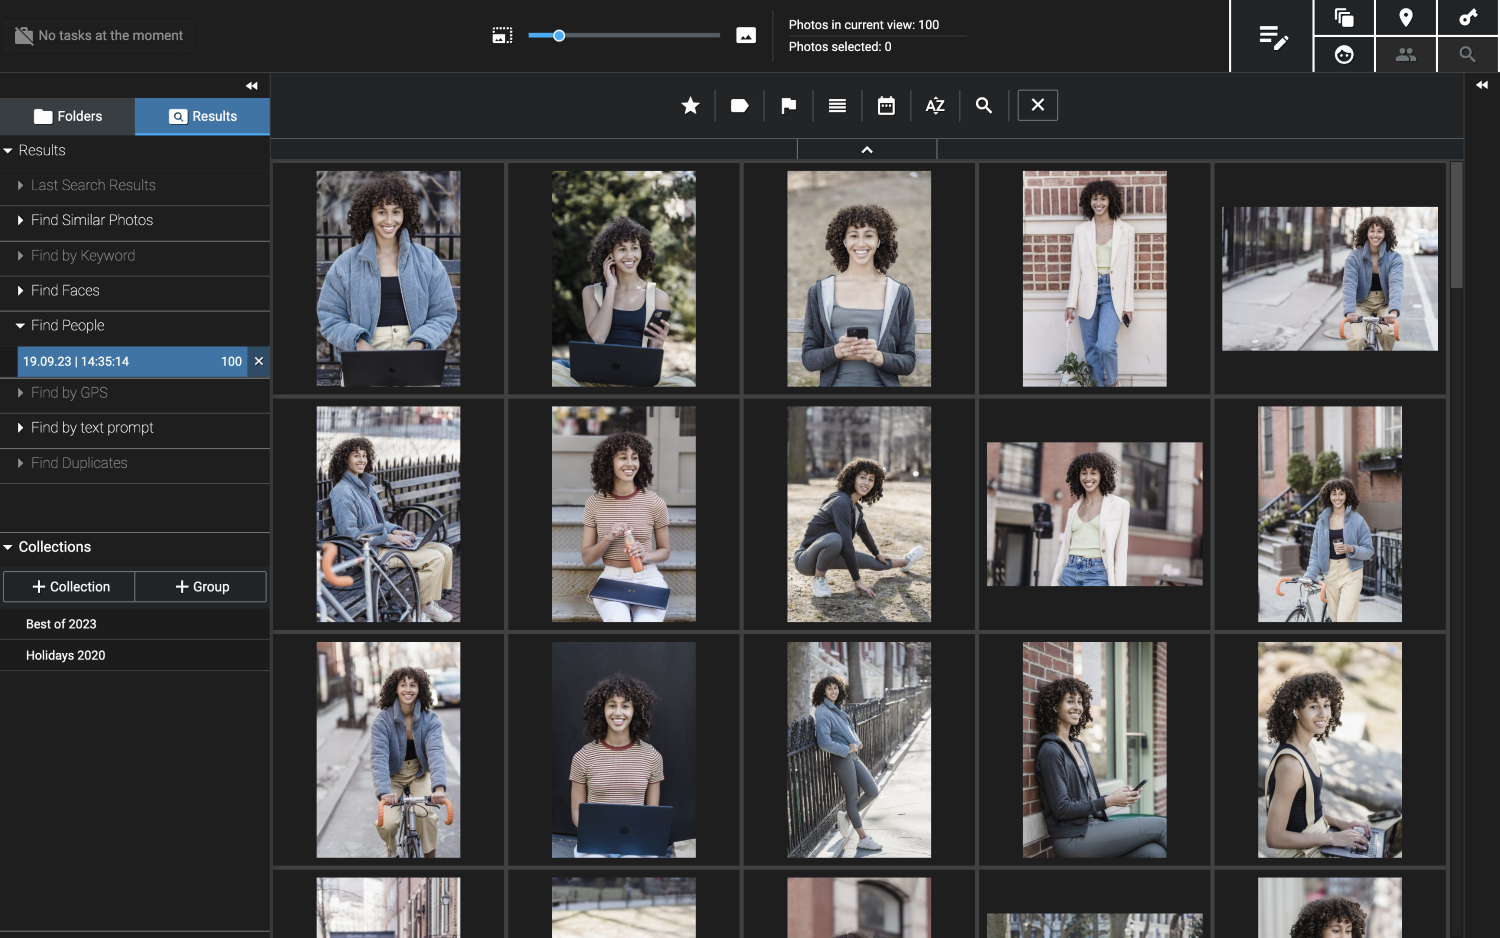 Excire's Find People search result the best photo organization software with facial recognition